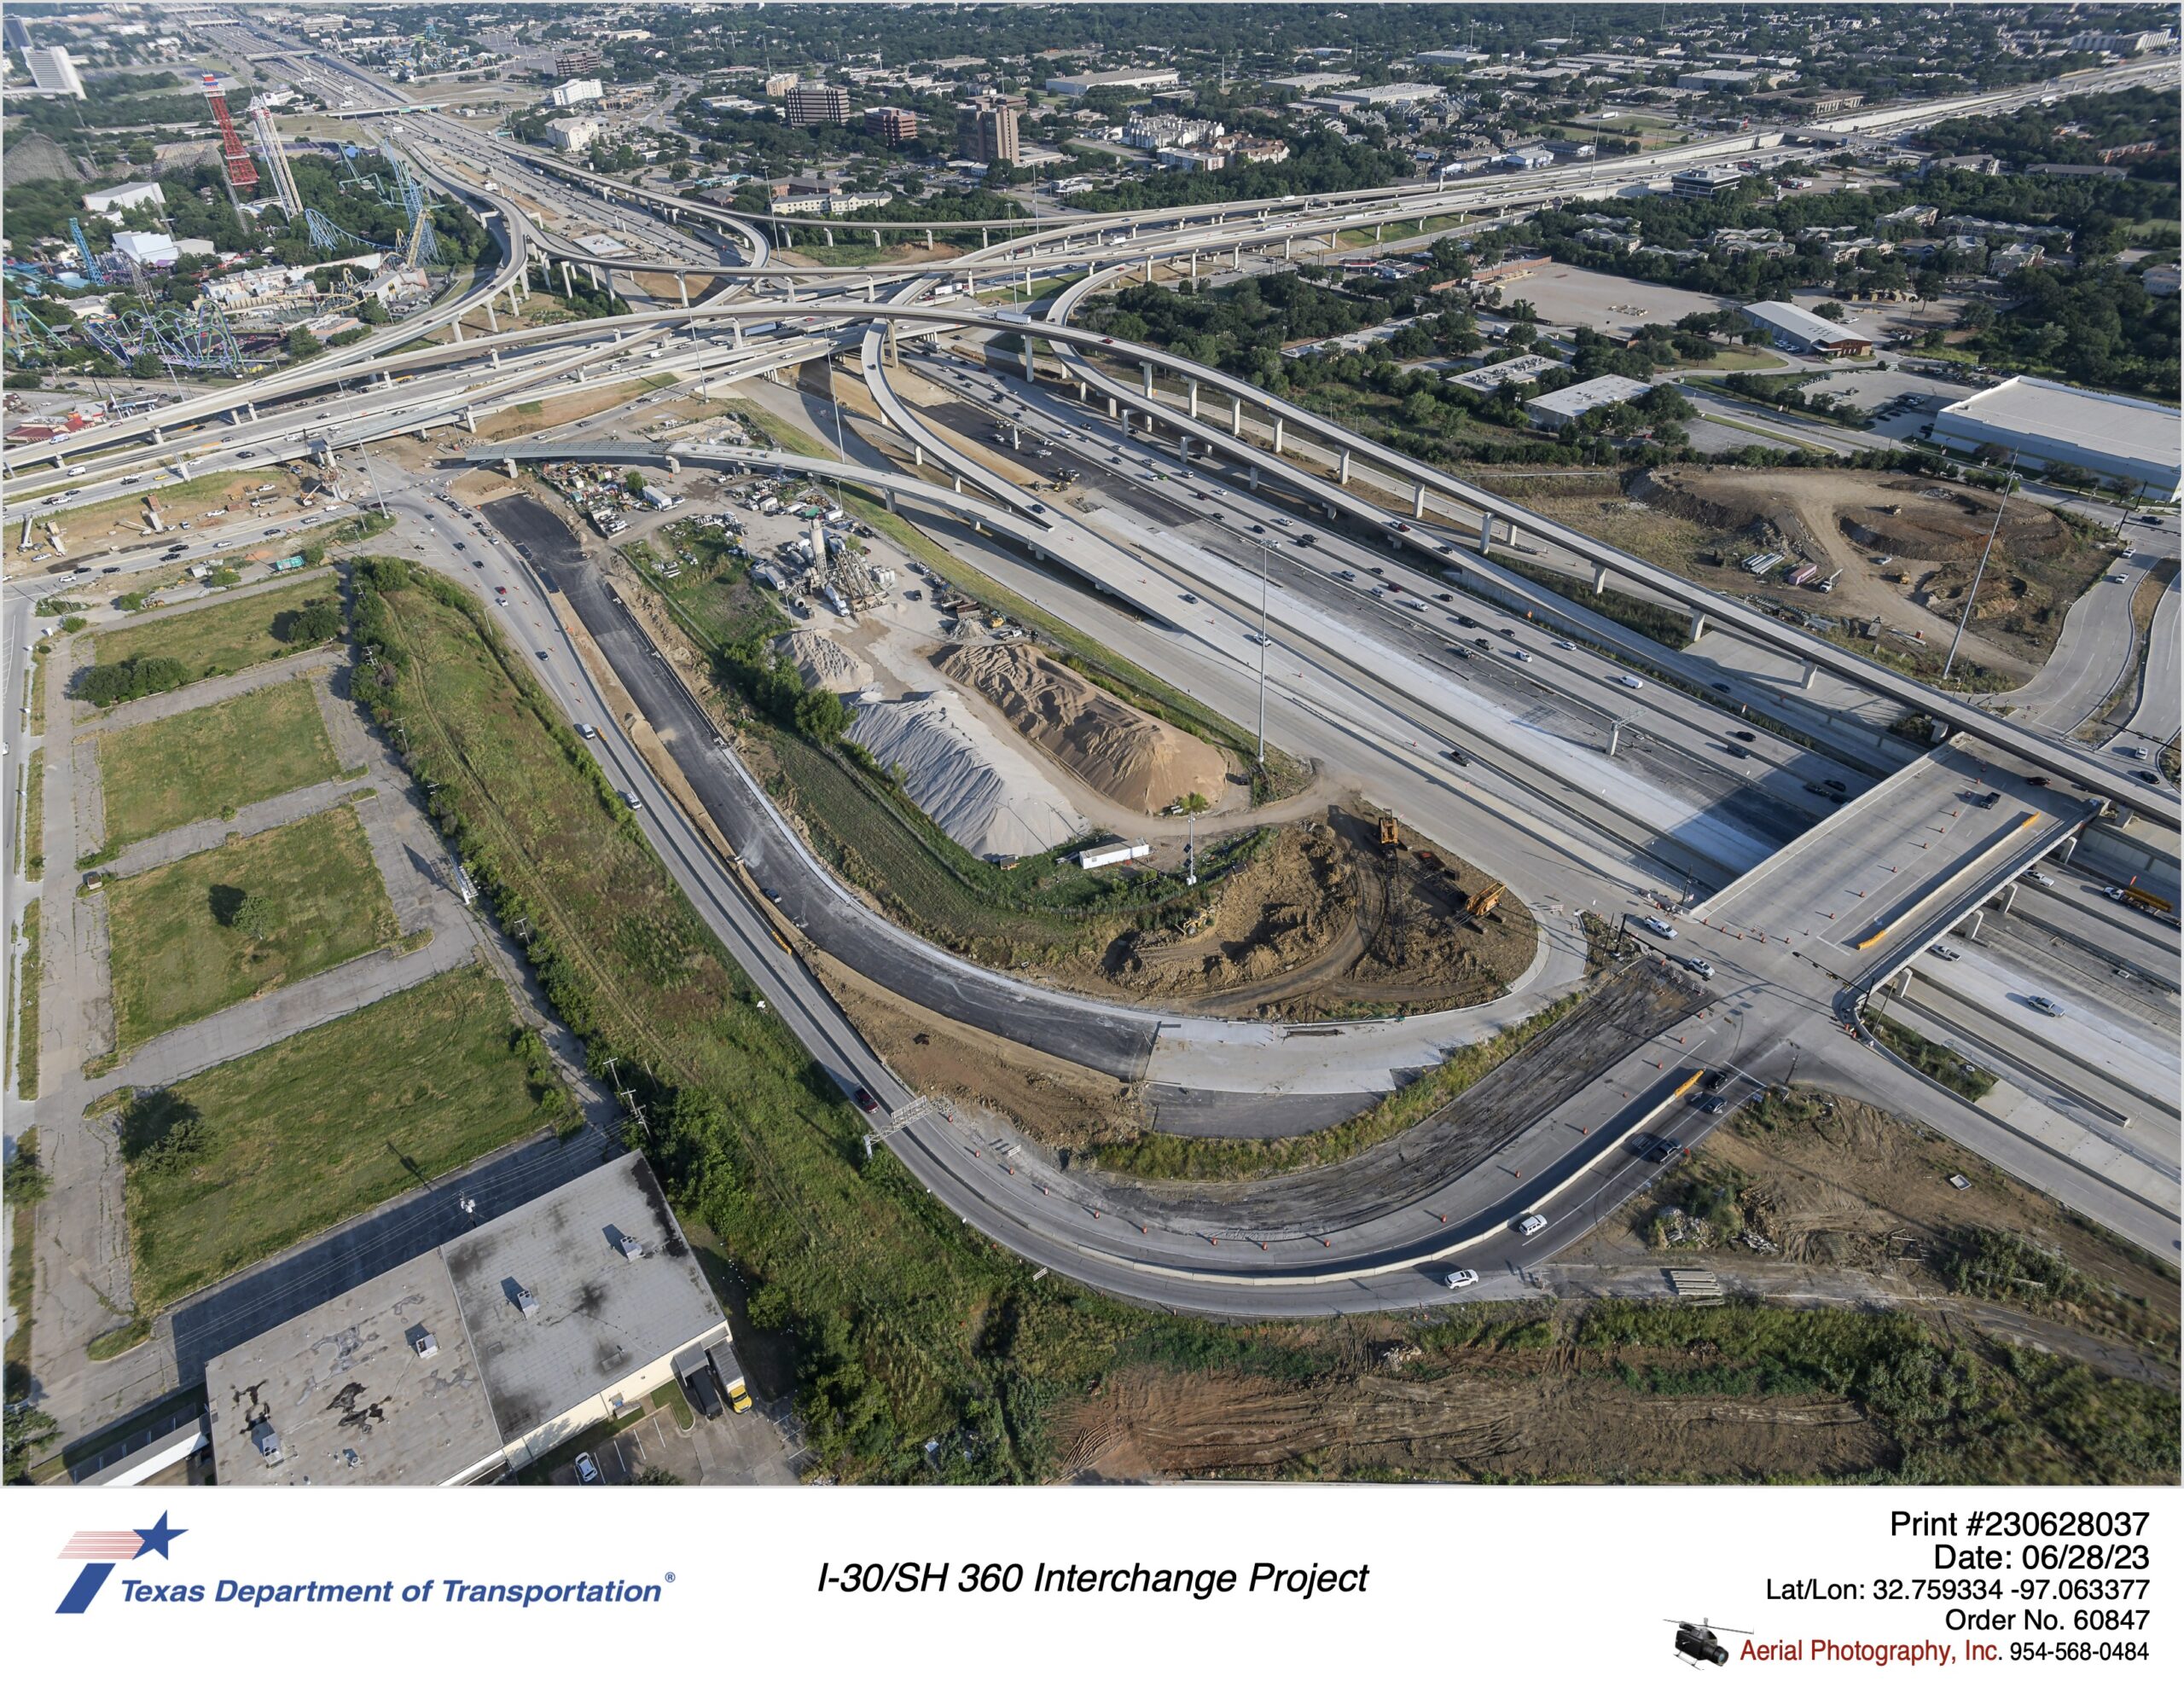 I-30 and SH 360 interchange looking northwest at Six Flags Dr connection between I-30 and SH 360. Image shows construction of eastbound mainlanes and Six Flags Dr.